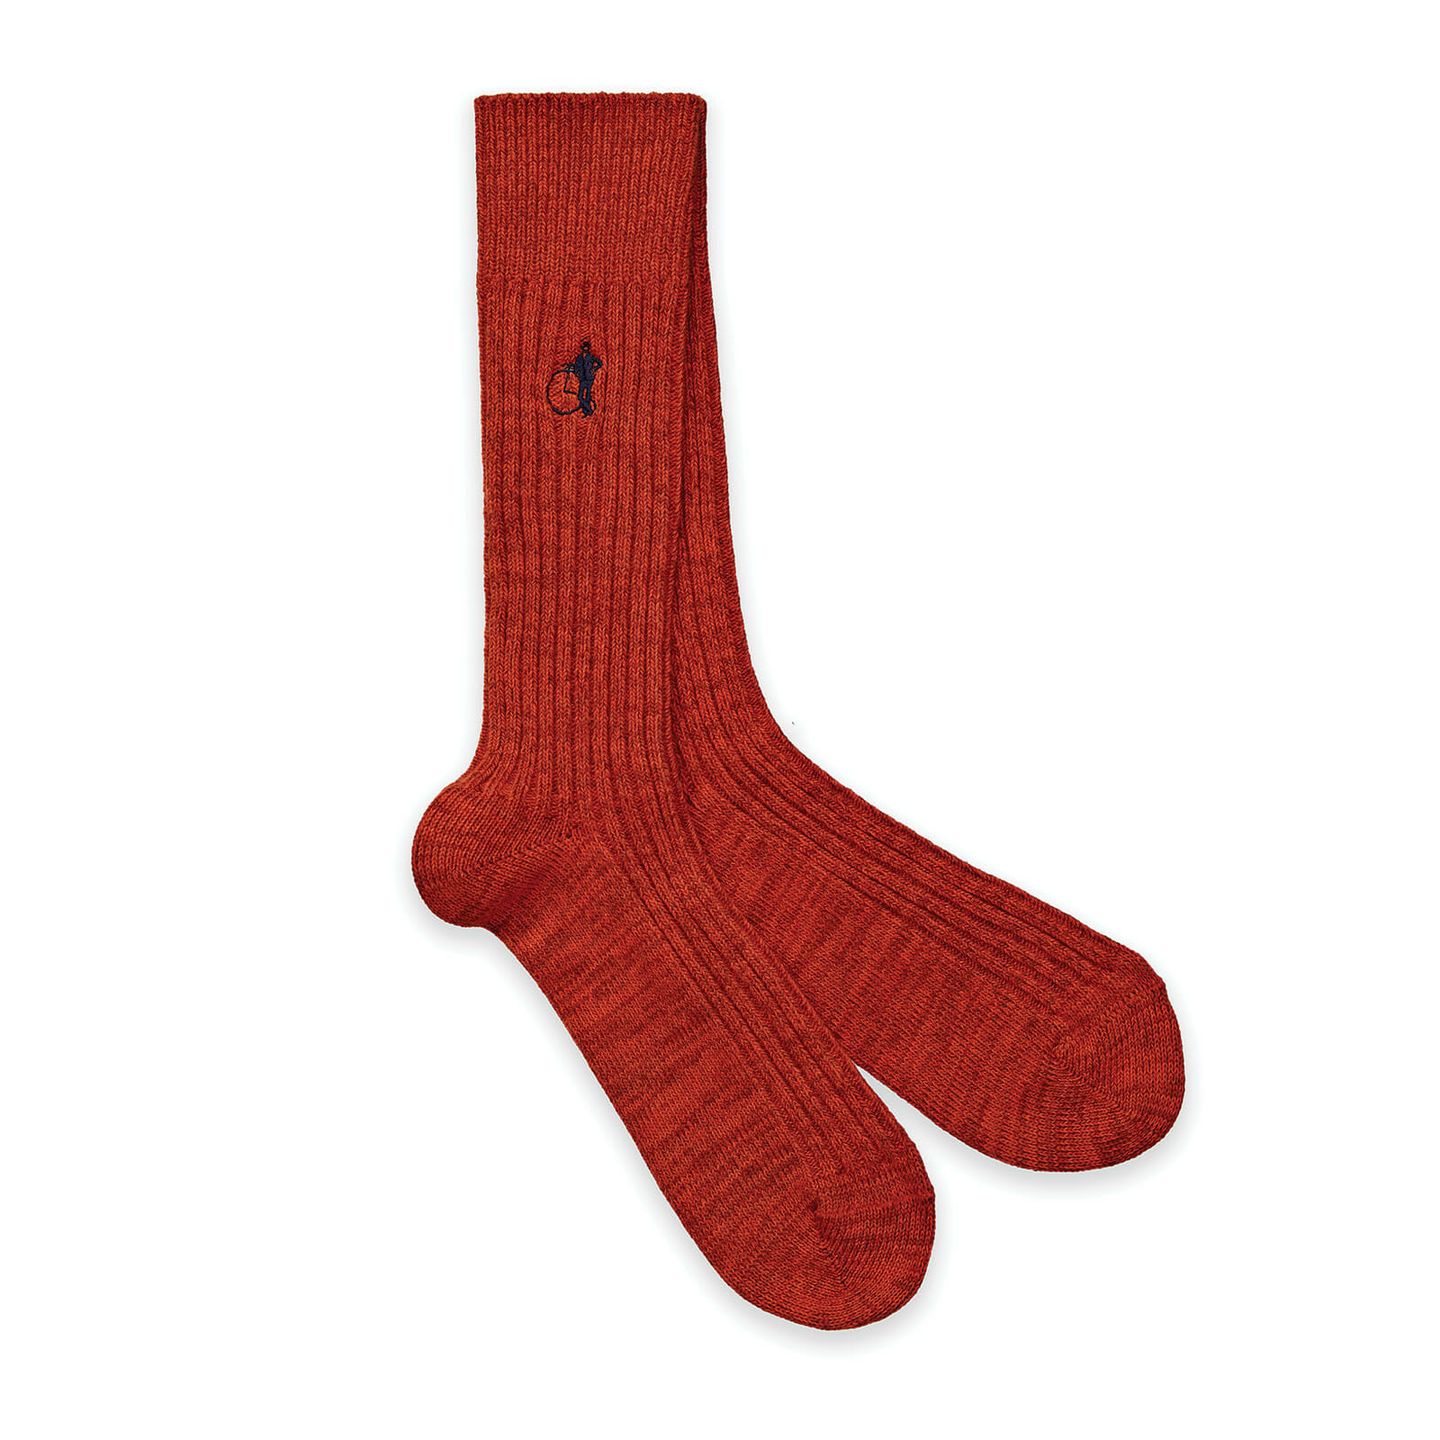 A pair of orange socks with a white background